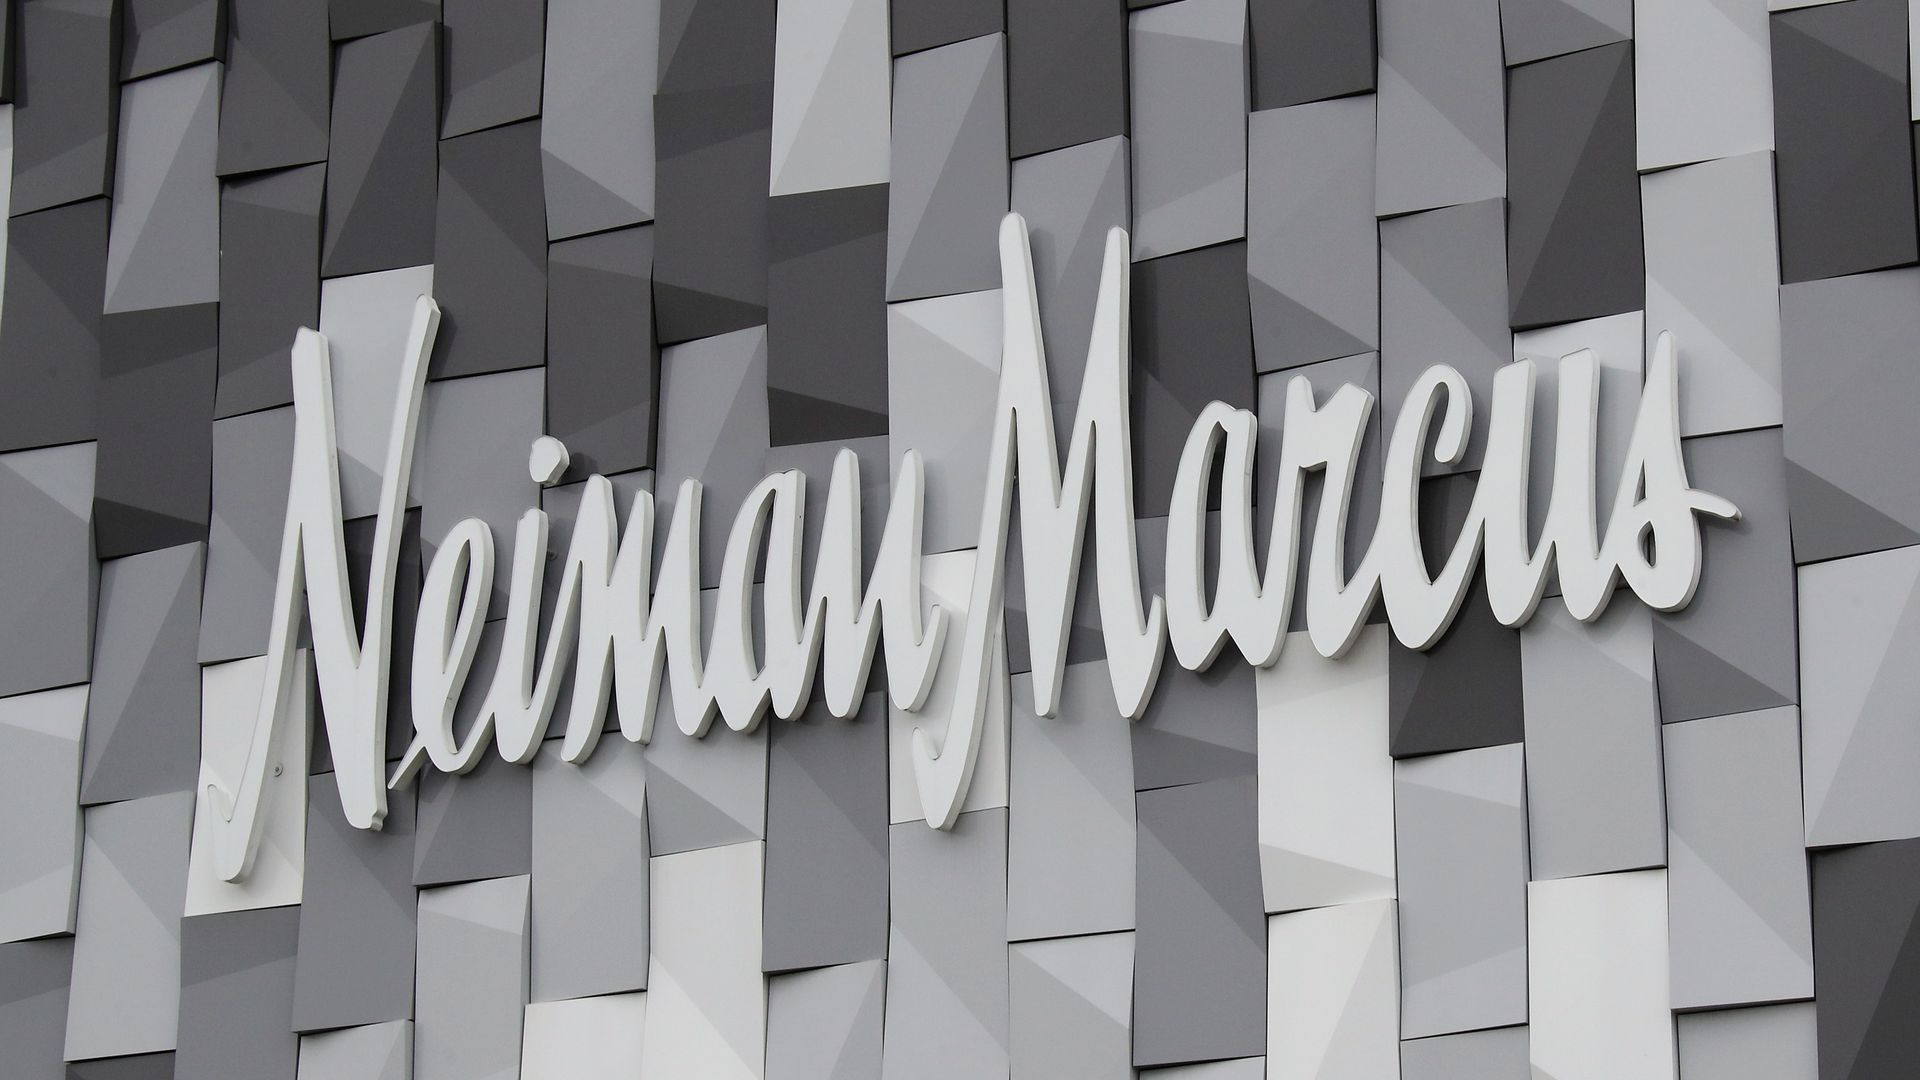 A Neiman Marcus sign